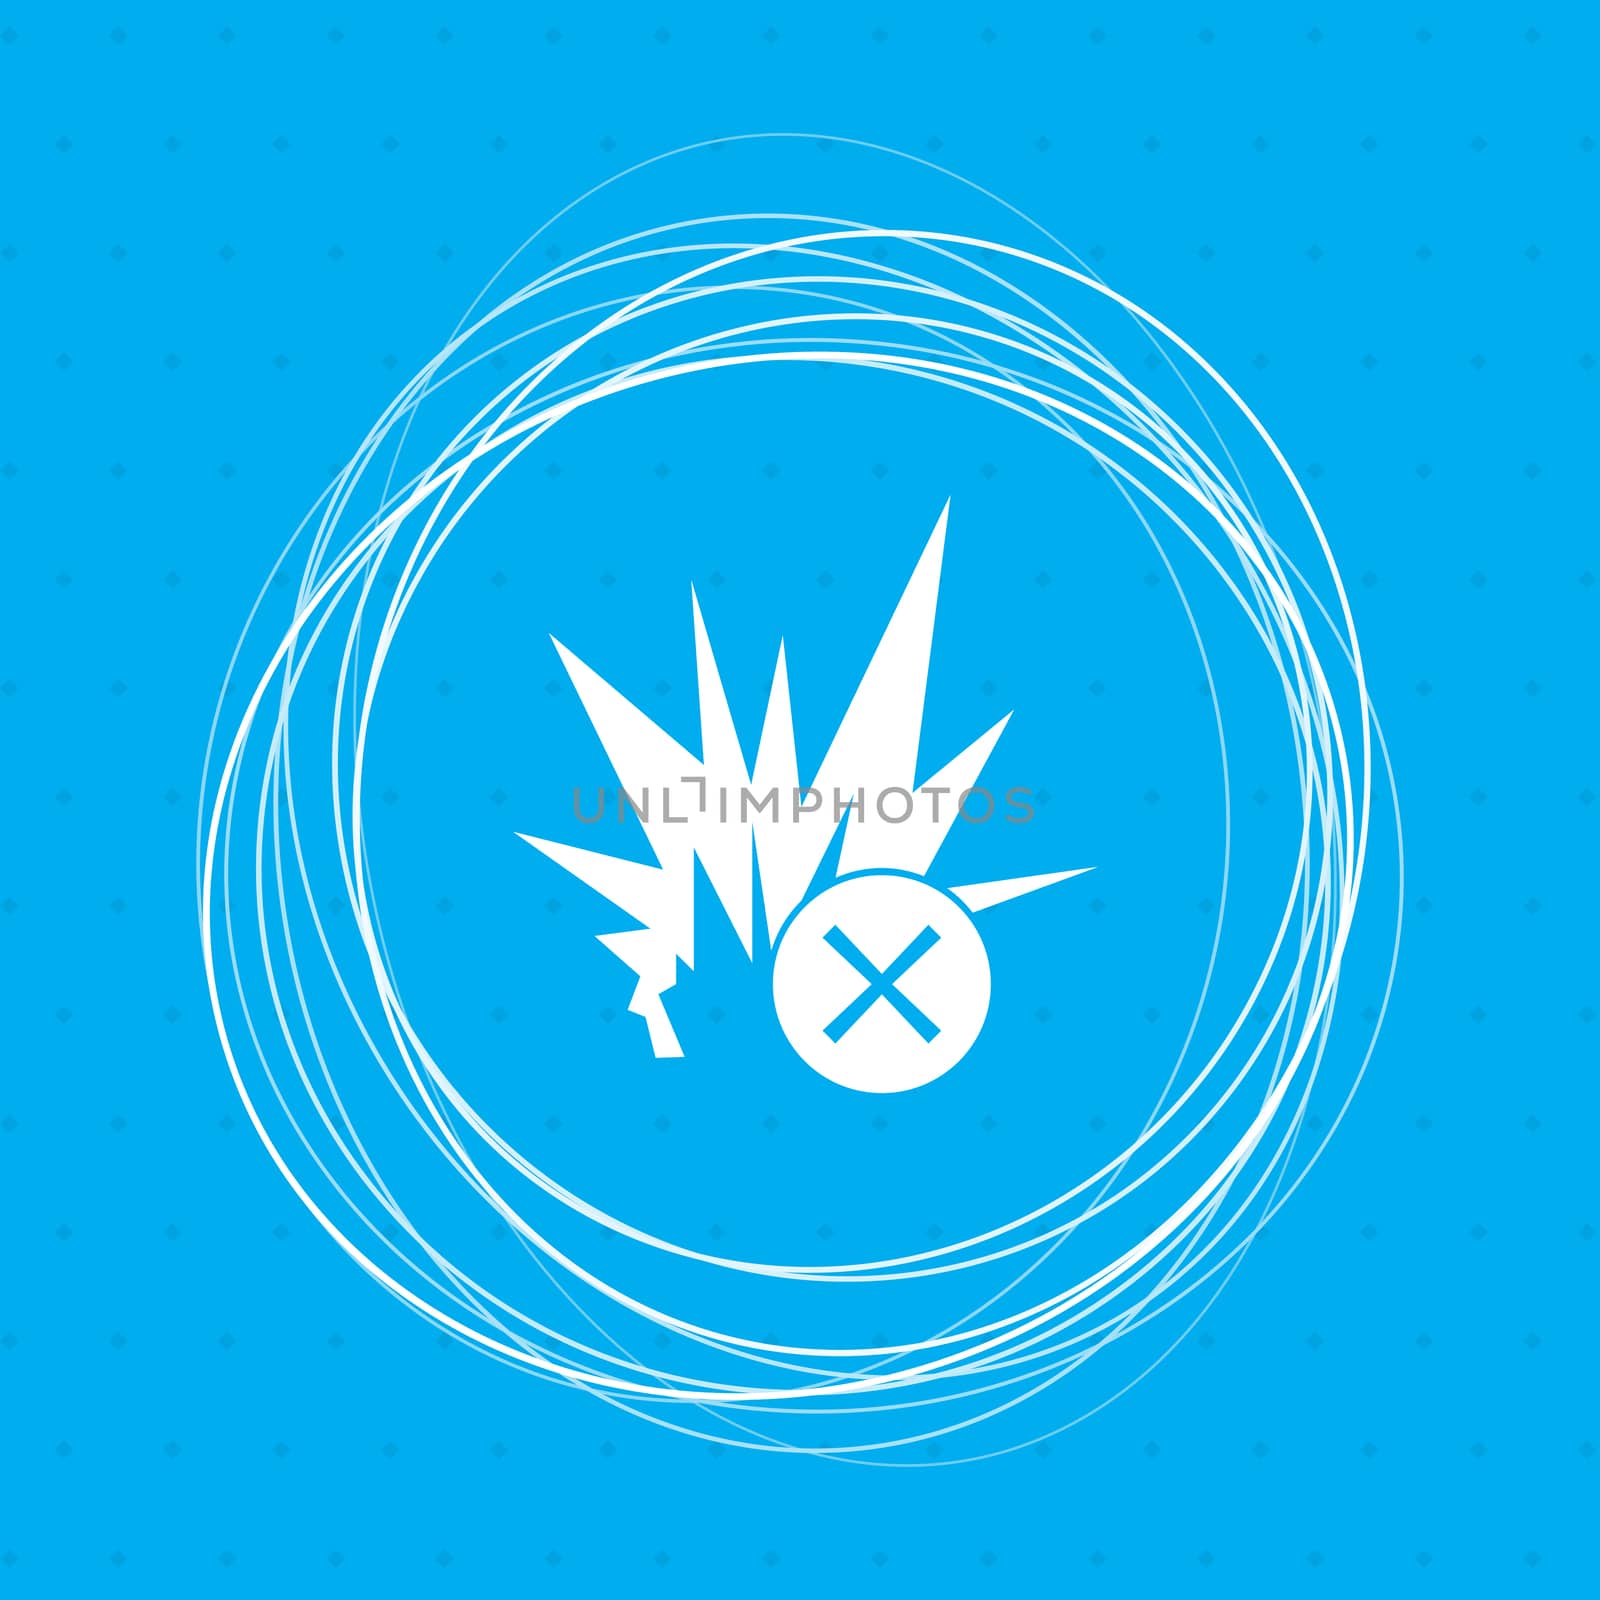 explosion icon on a blue background with abstract circles around and place for your text.  by Adamchuk